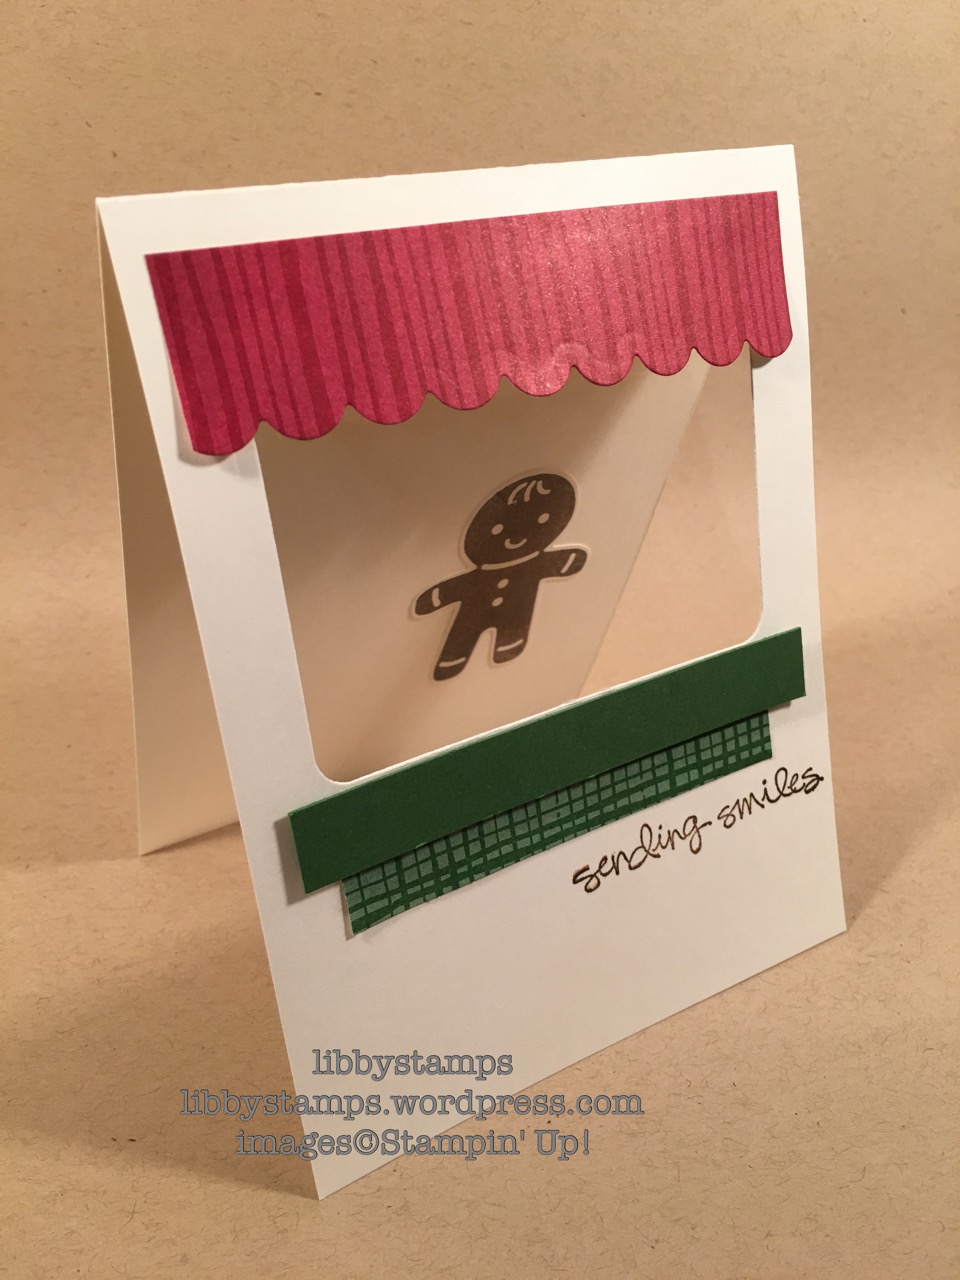 libbystamps, stampin up, Cookie Cutter Builder Punch, Cookie Cutter Christmas, Greatest Greetings, Cutie Pie Thinlits, This Christmas DSP, TSOT287